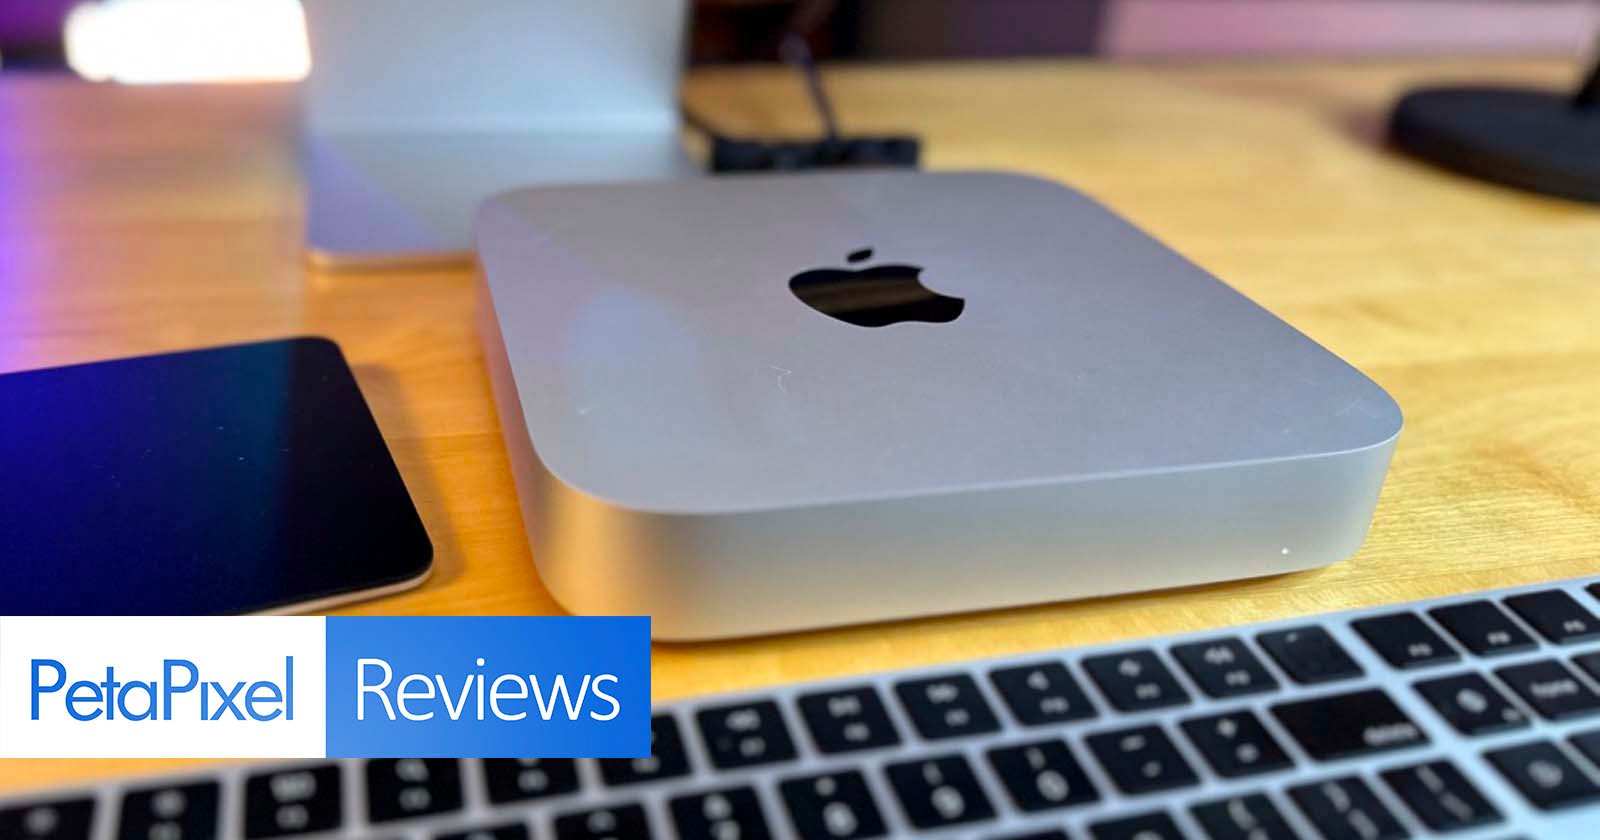 MacBook Pro M2 Pro review: Apple's best laptop gets more power and